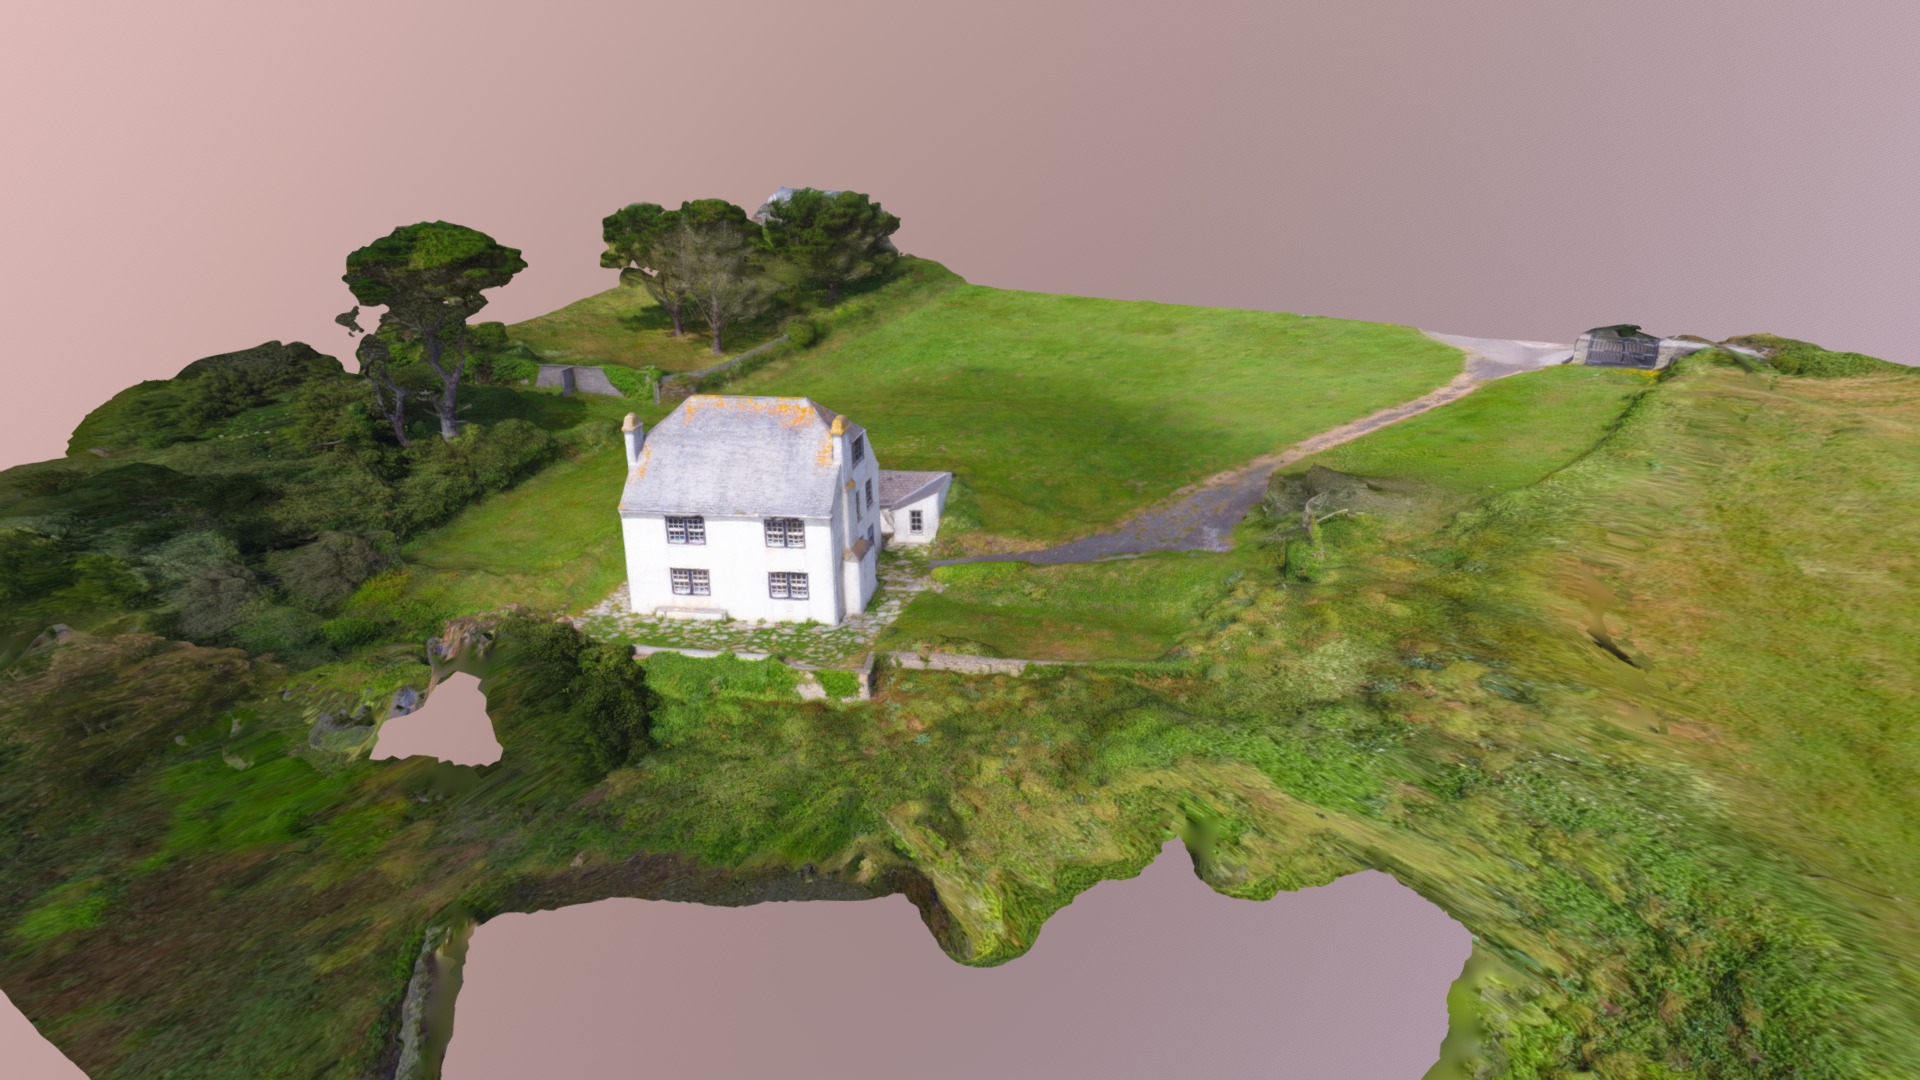 3D model Polruan - This is a 3D model of the Polruan. The 3D model is about a house on a hill.